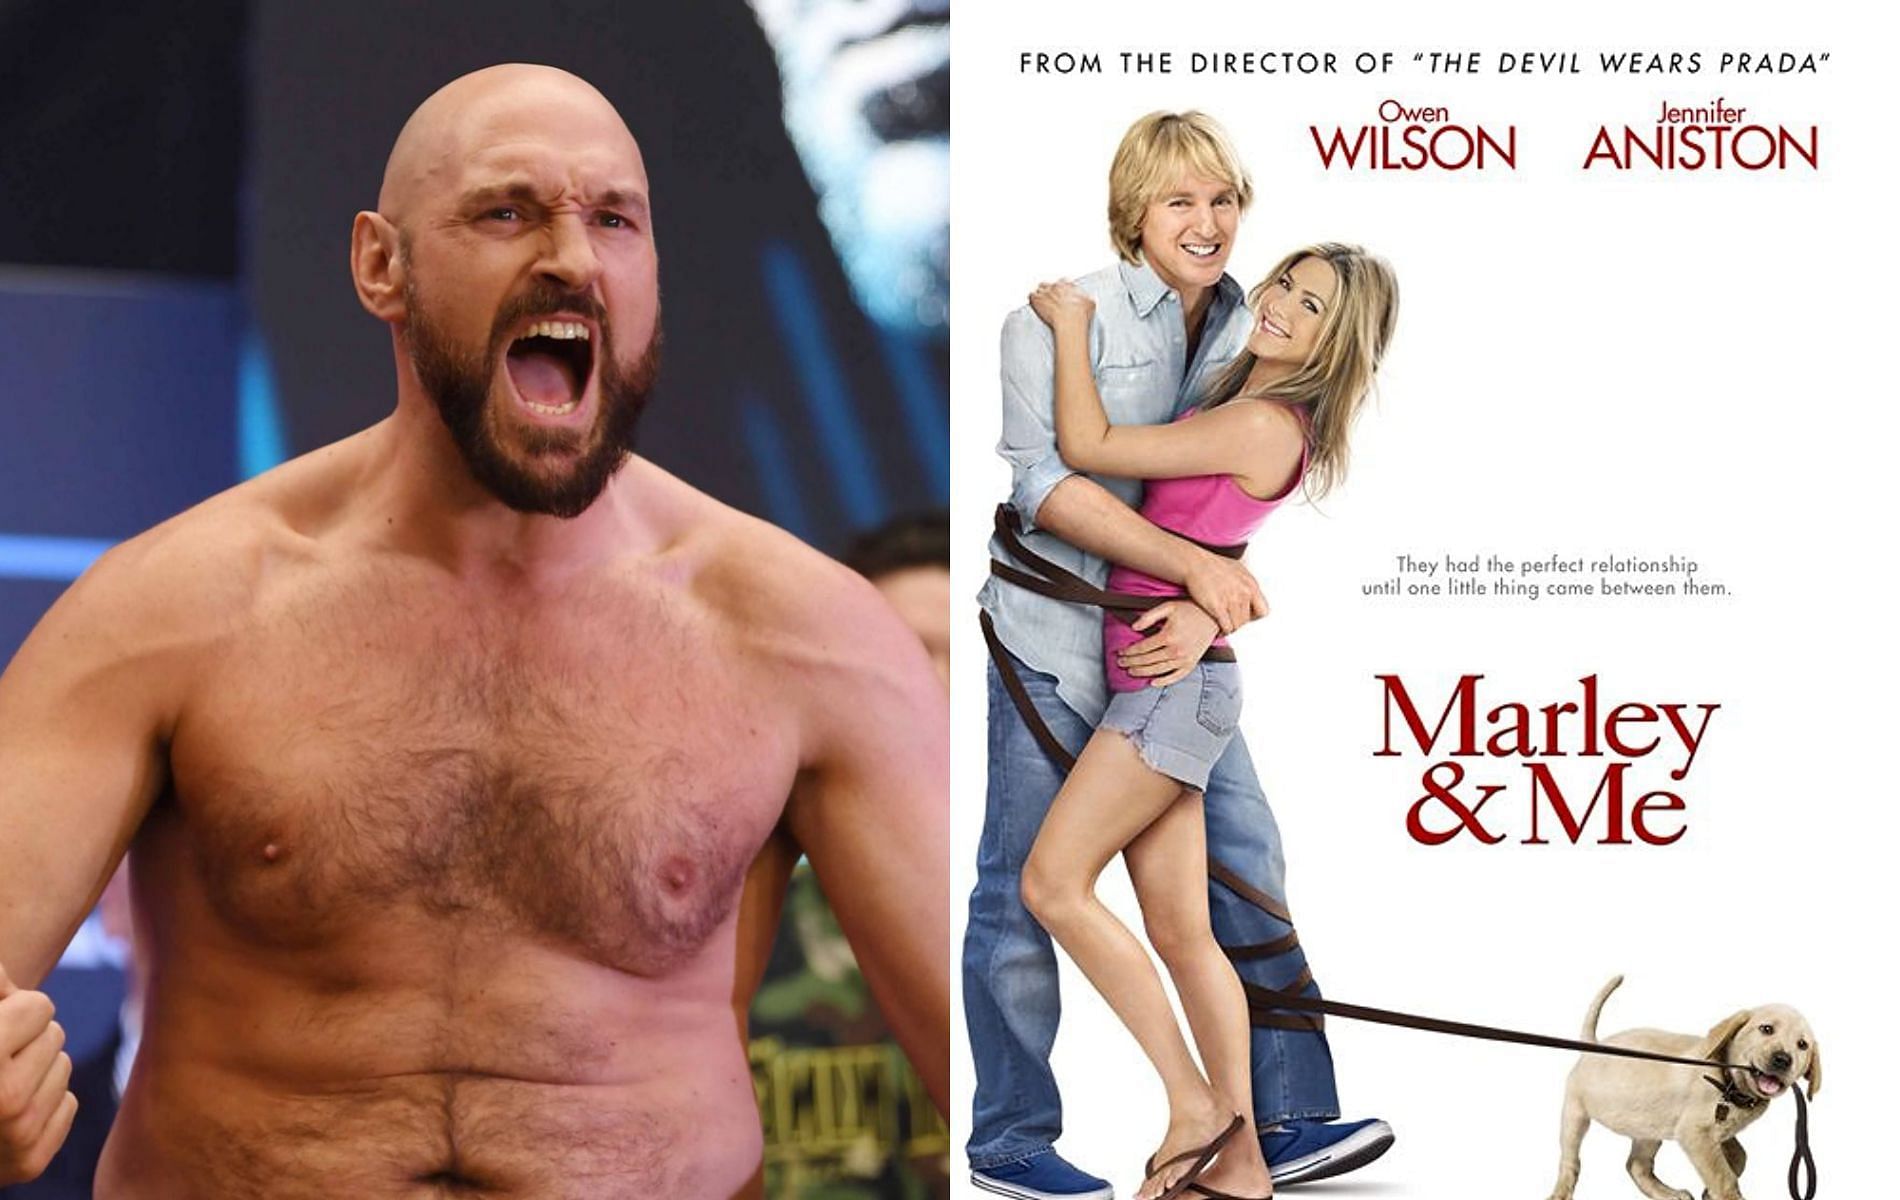 Tyson Fury (left) and Marley and Me poster (right)